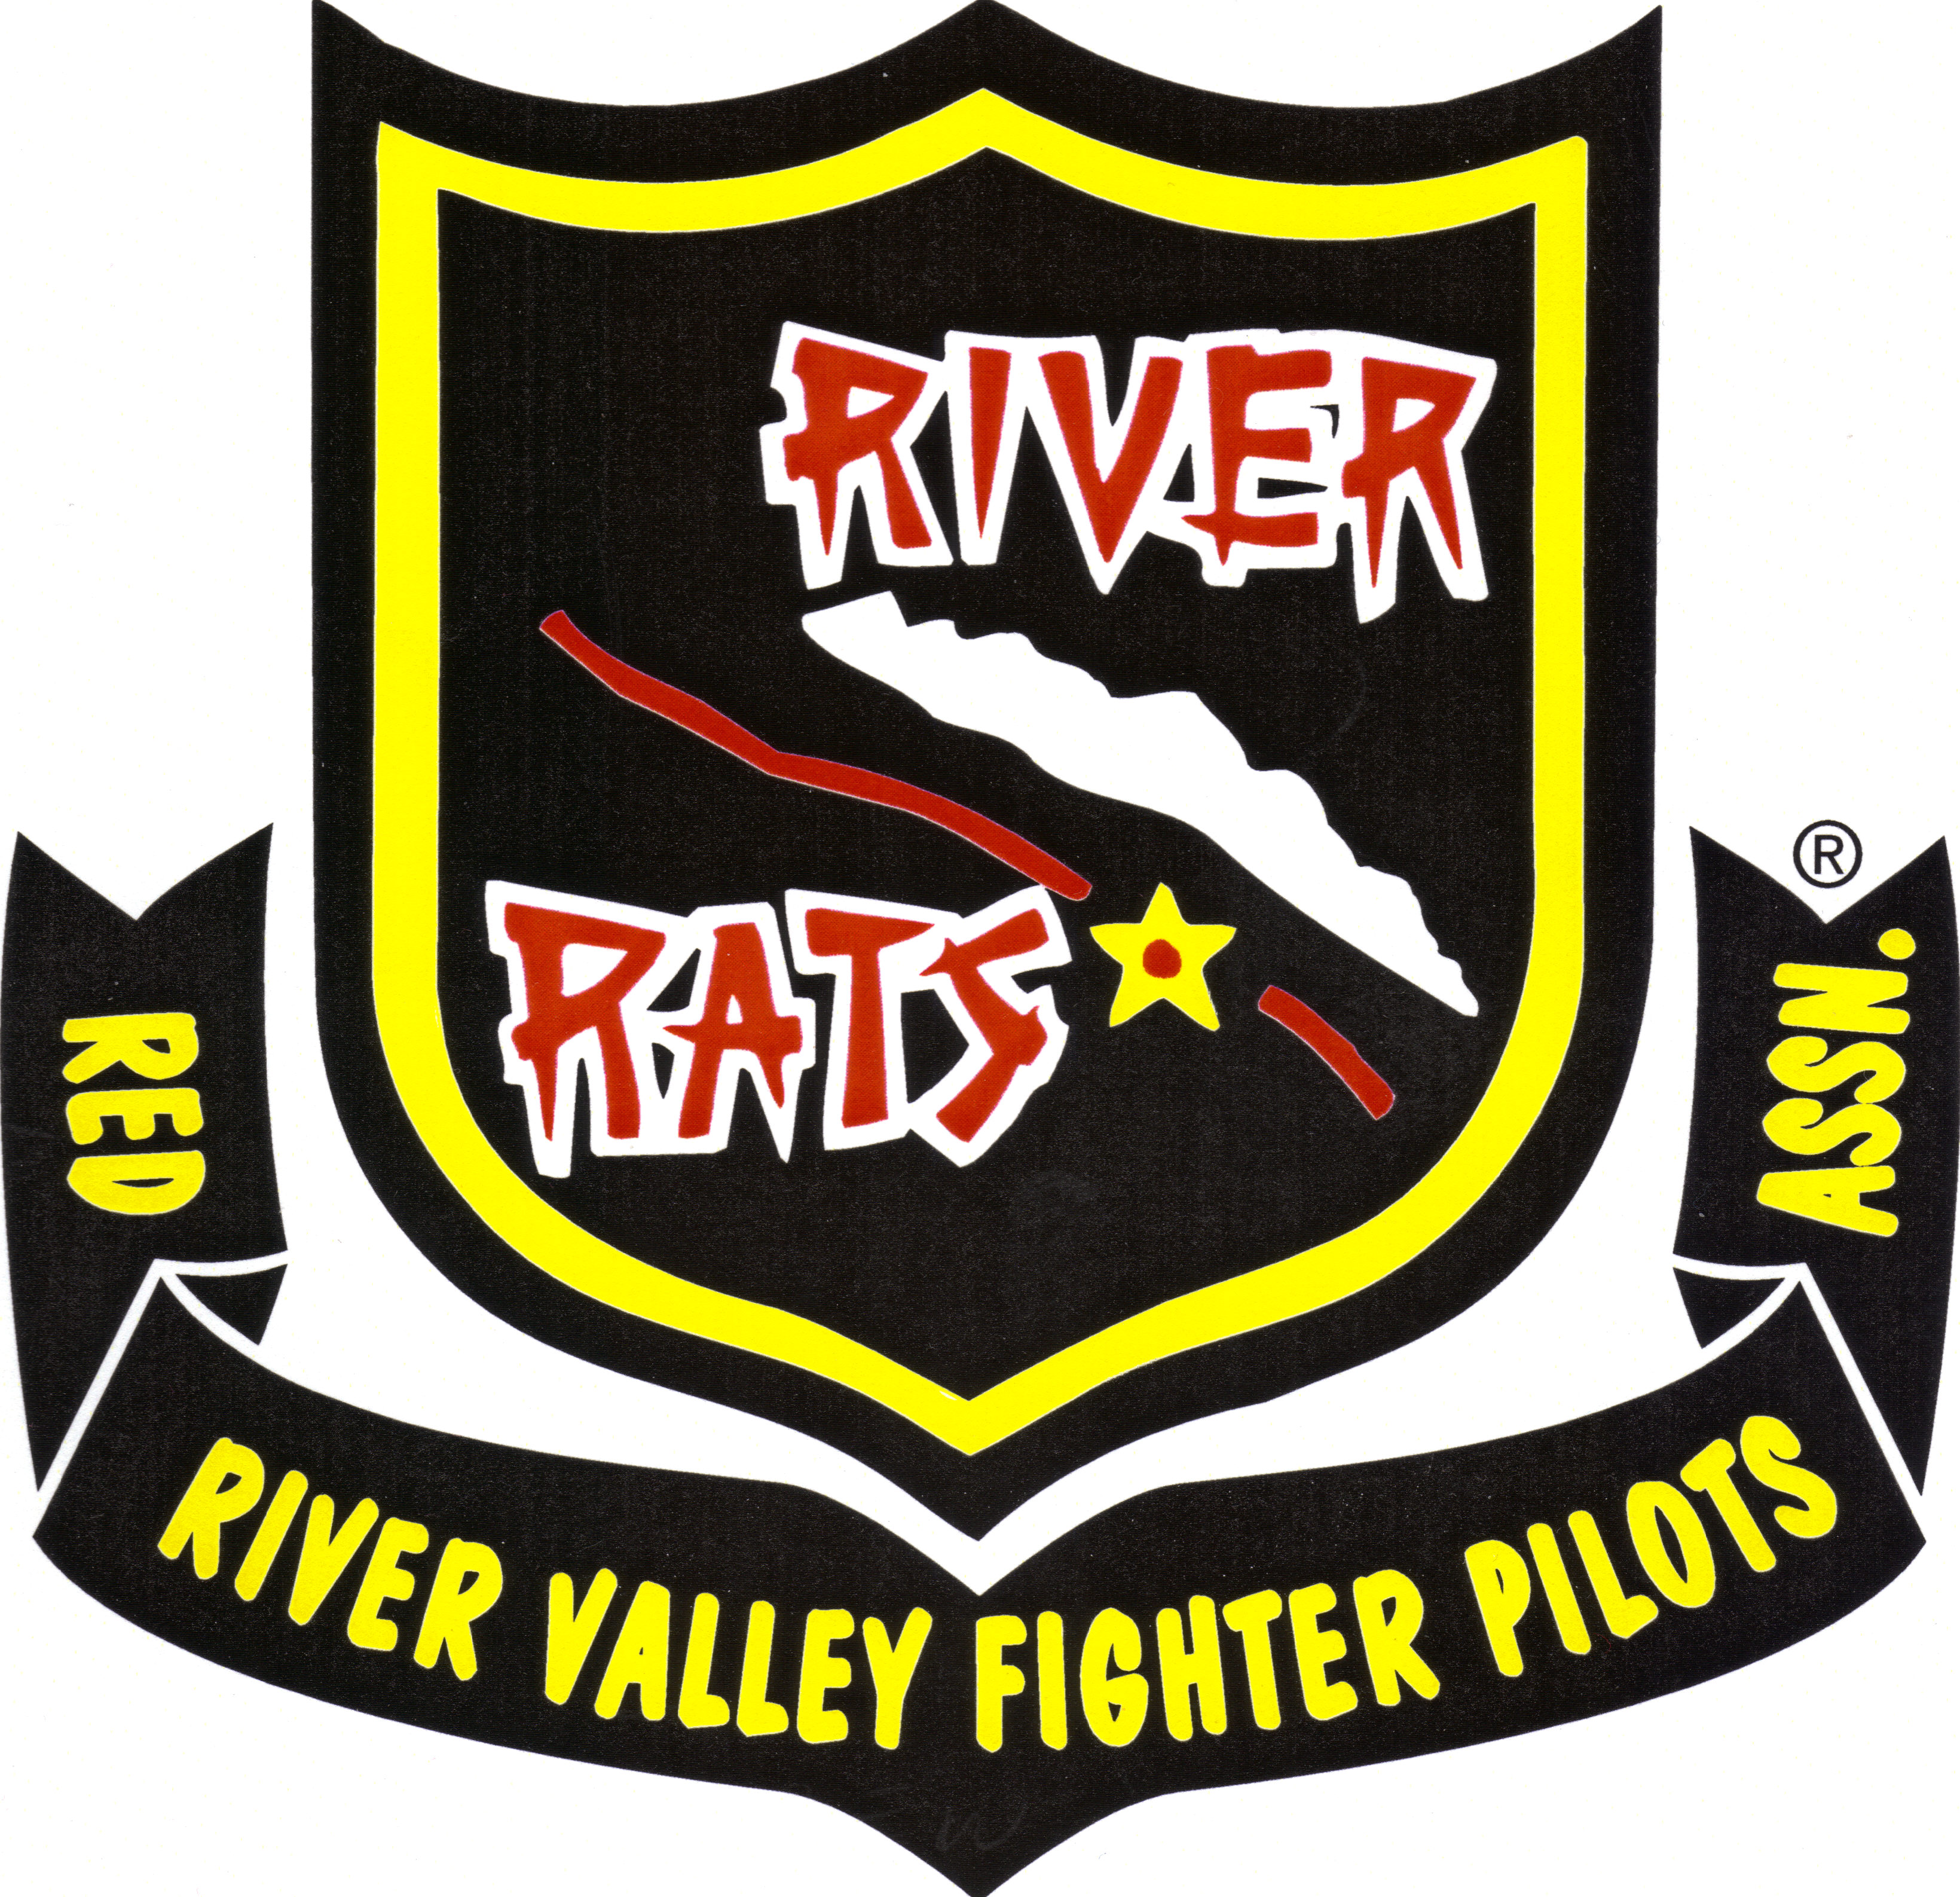 Red River Valley Fighter Pilots Association